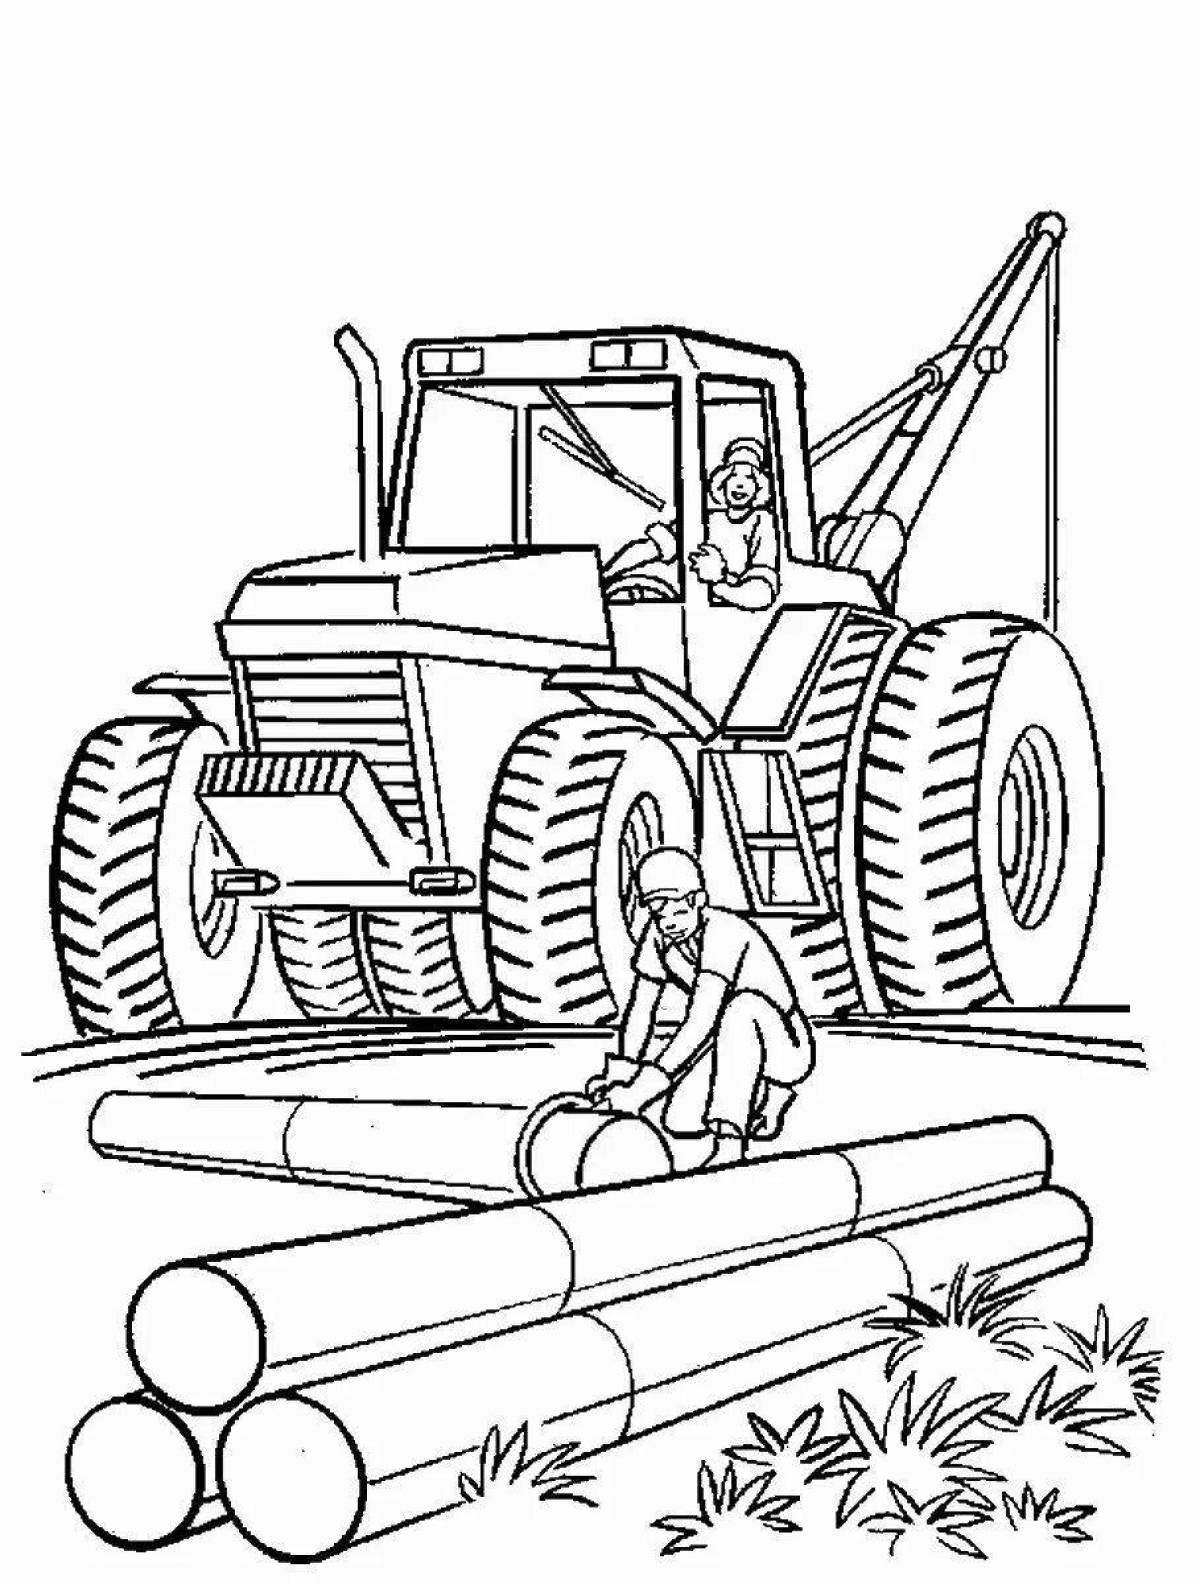 Attractive agricultural machinery coloring pages for children